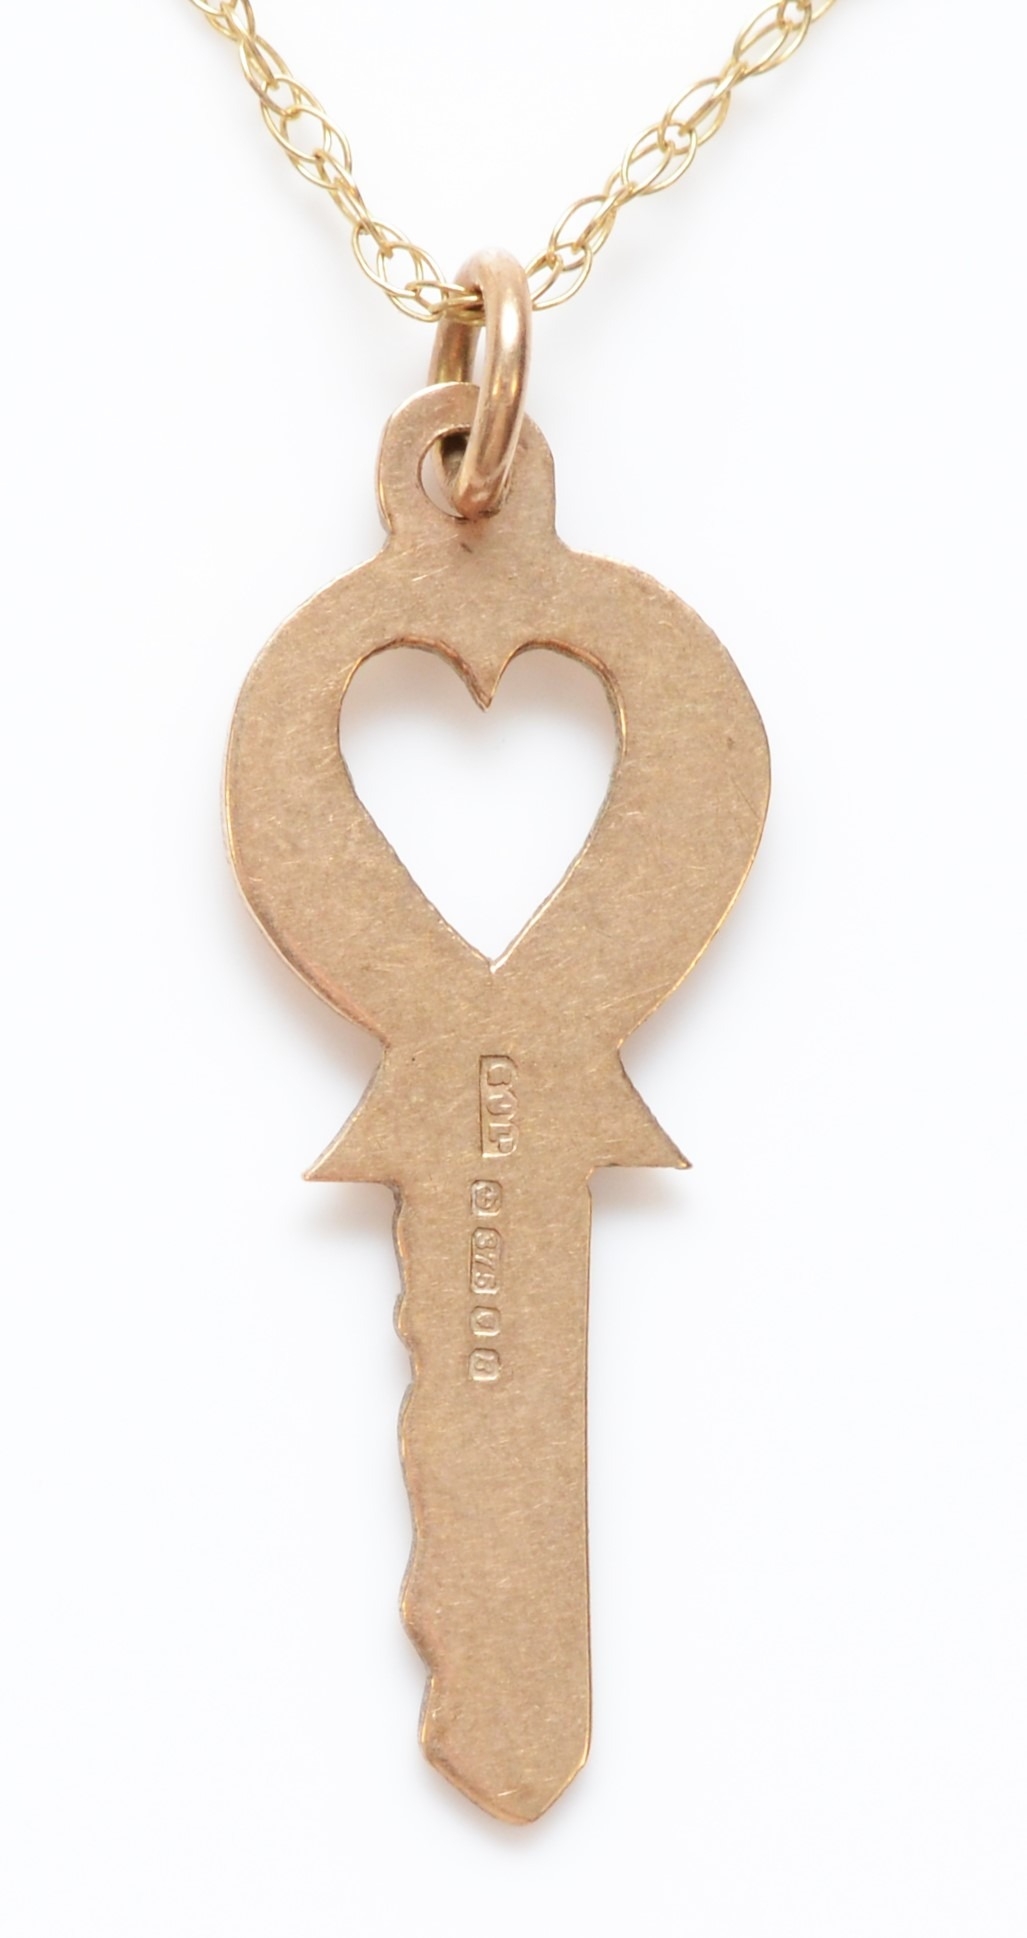 A vintage 9ct gold key pendant, London 1976, 27mm, chain, 1.5gm - Image 2 of 2